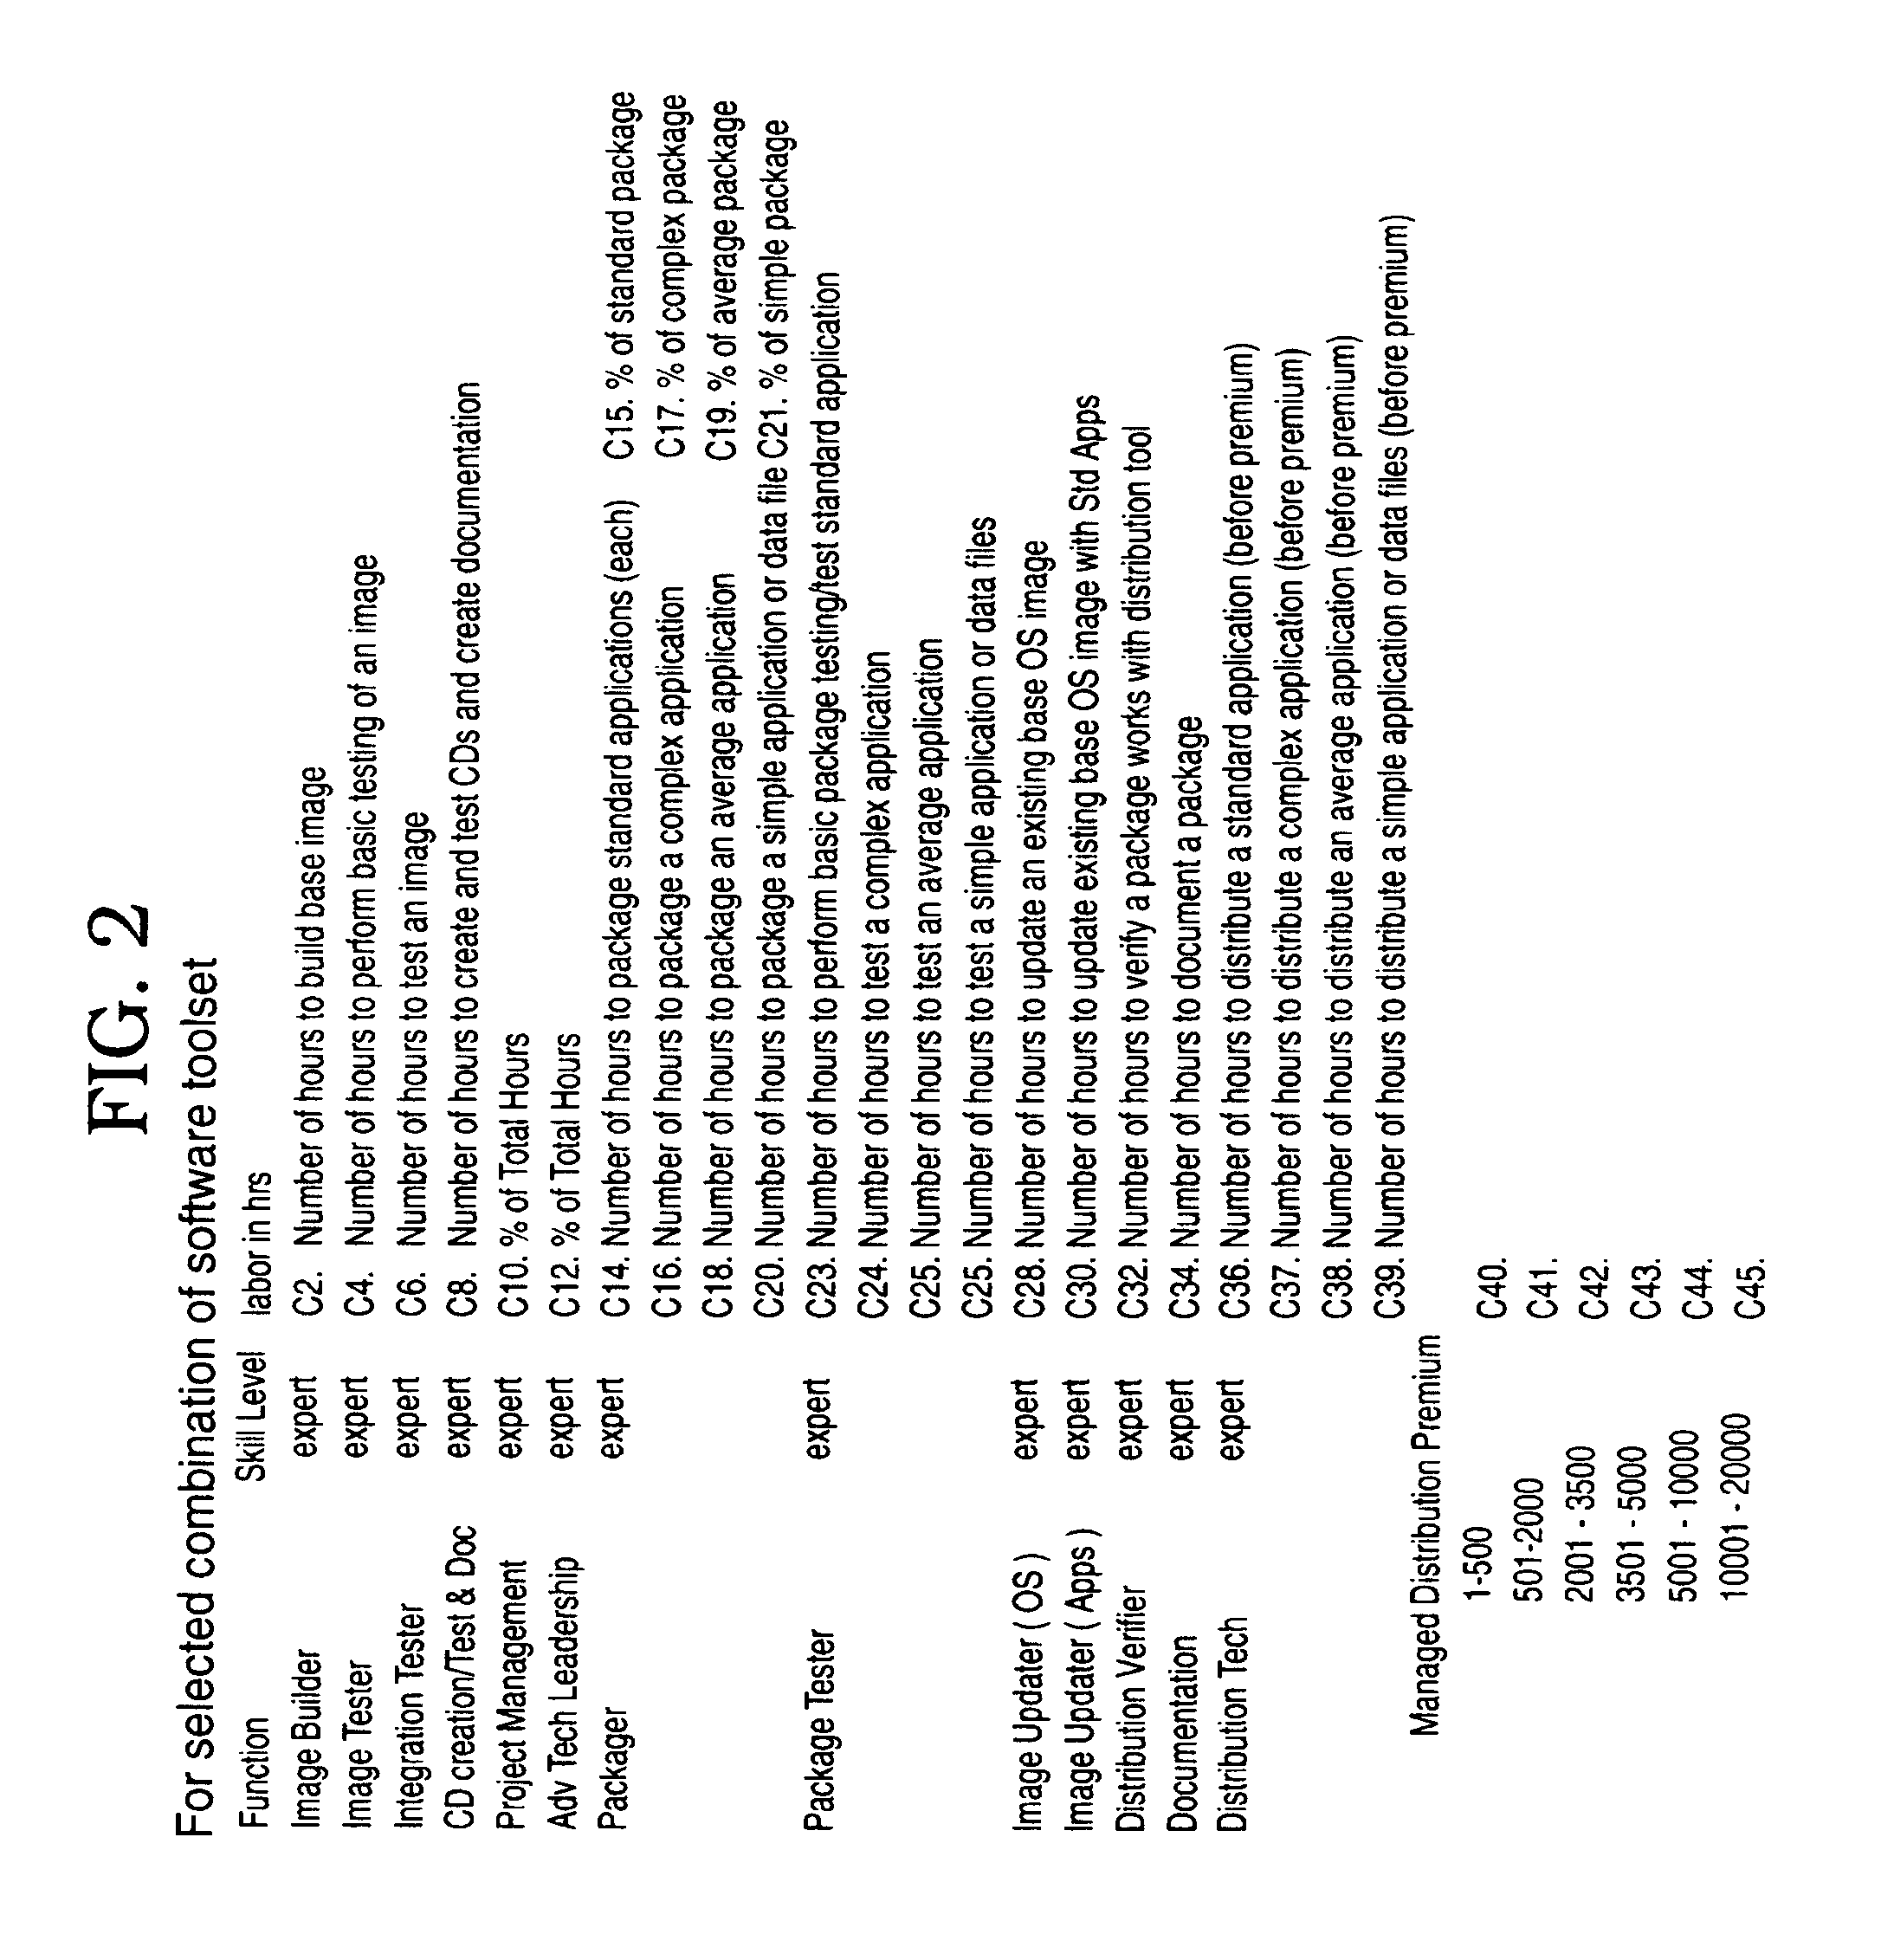 System, method and program to estimate cost of distributing software